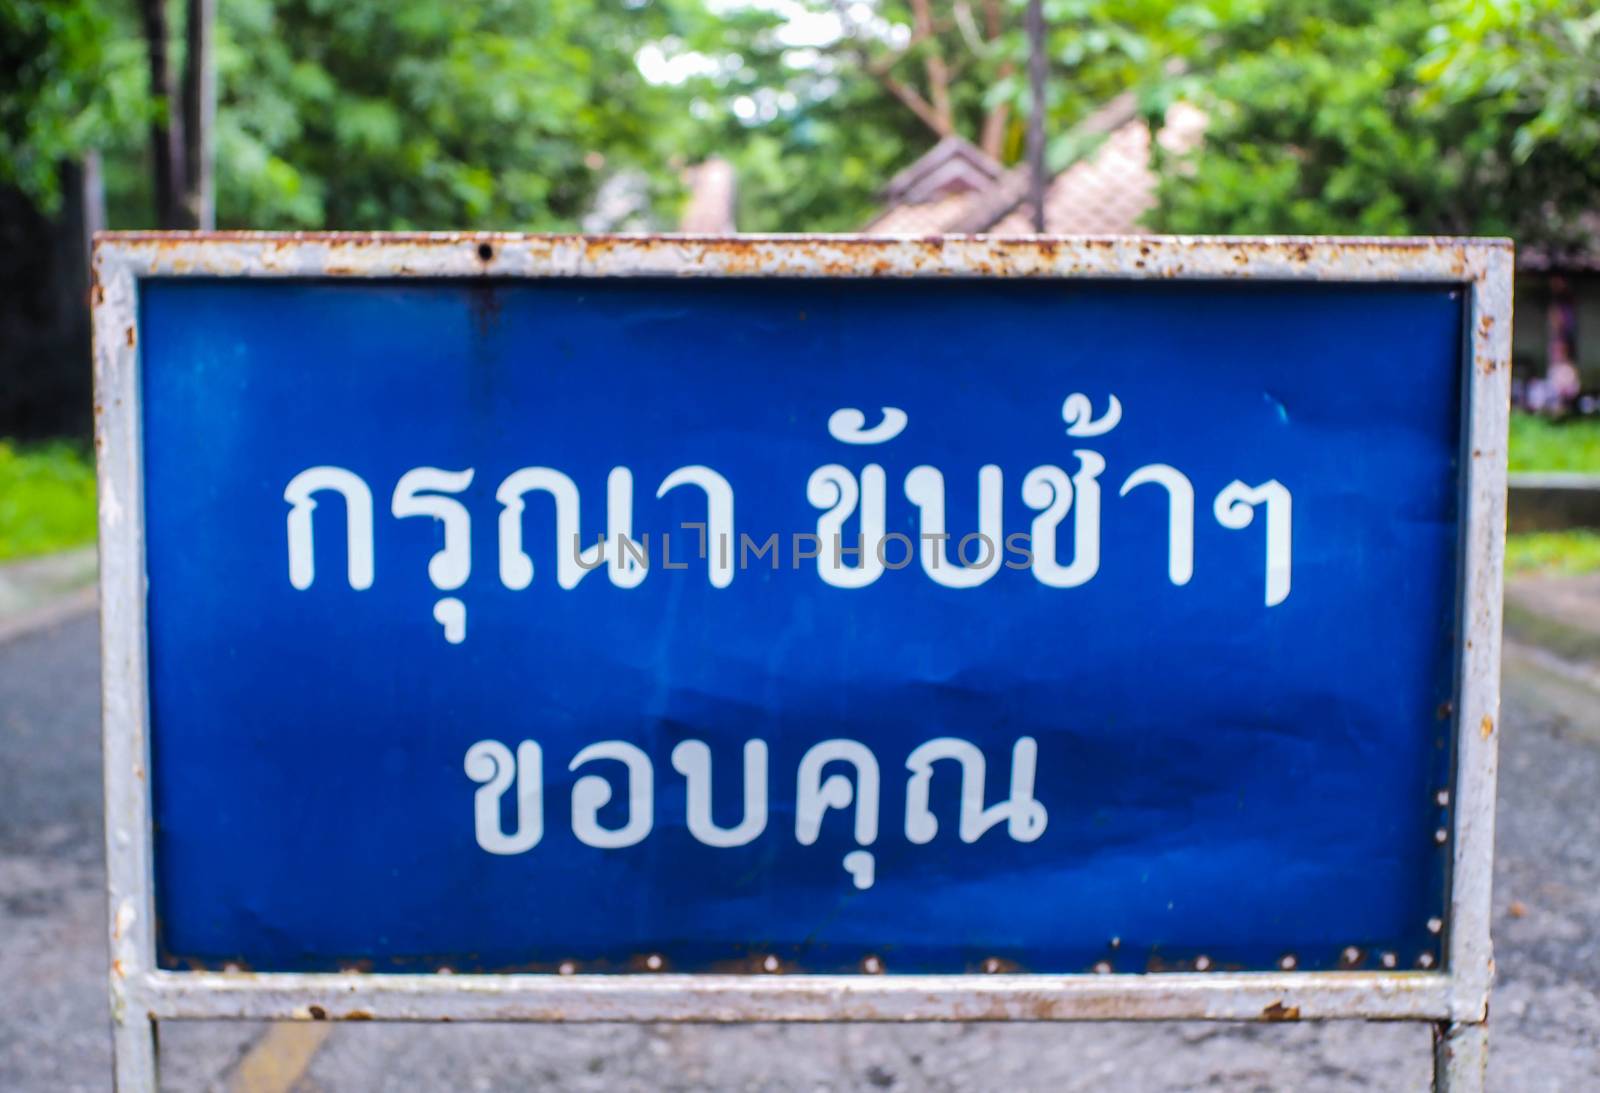 Thai sign means "Please drive slowly, Thank" by sittisak-st